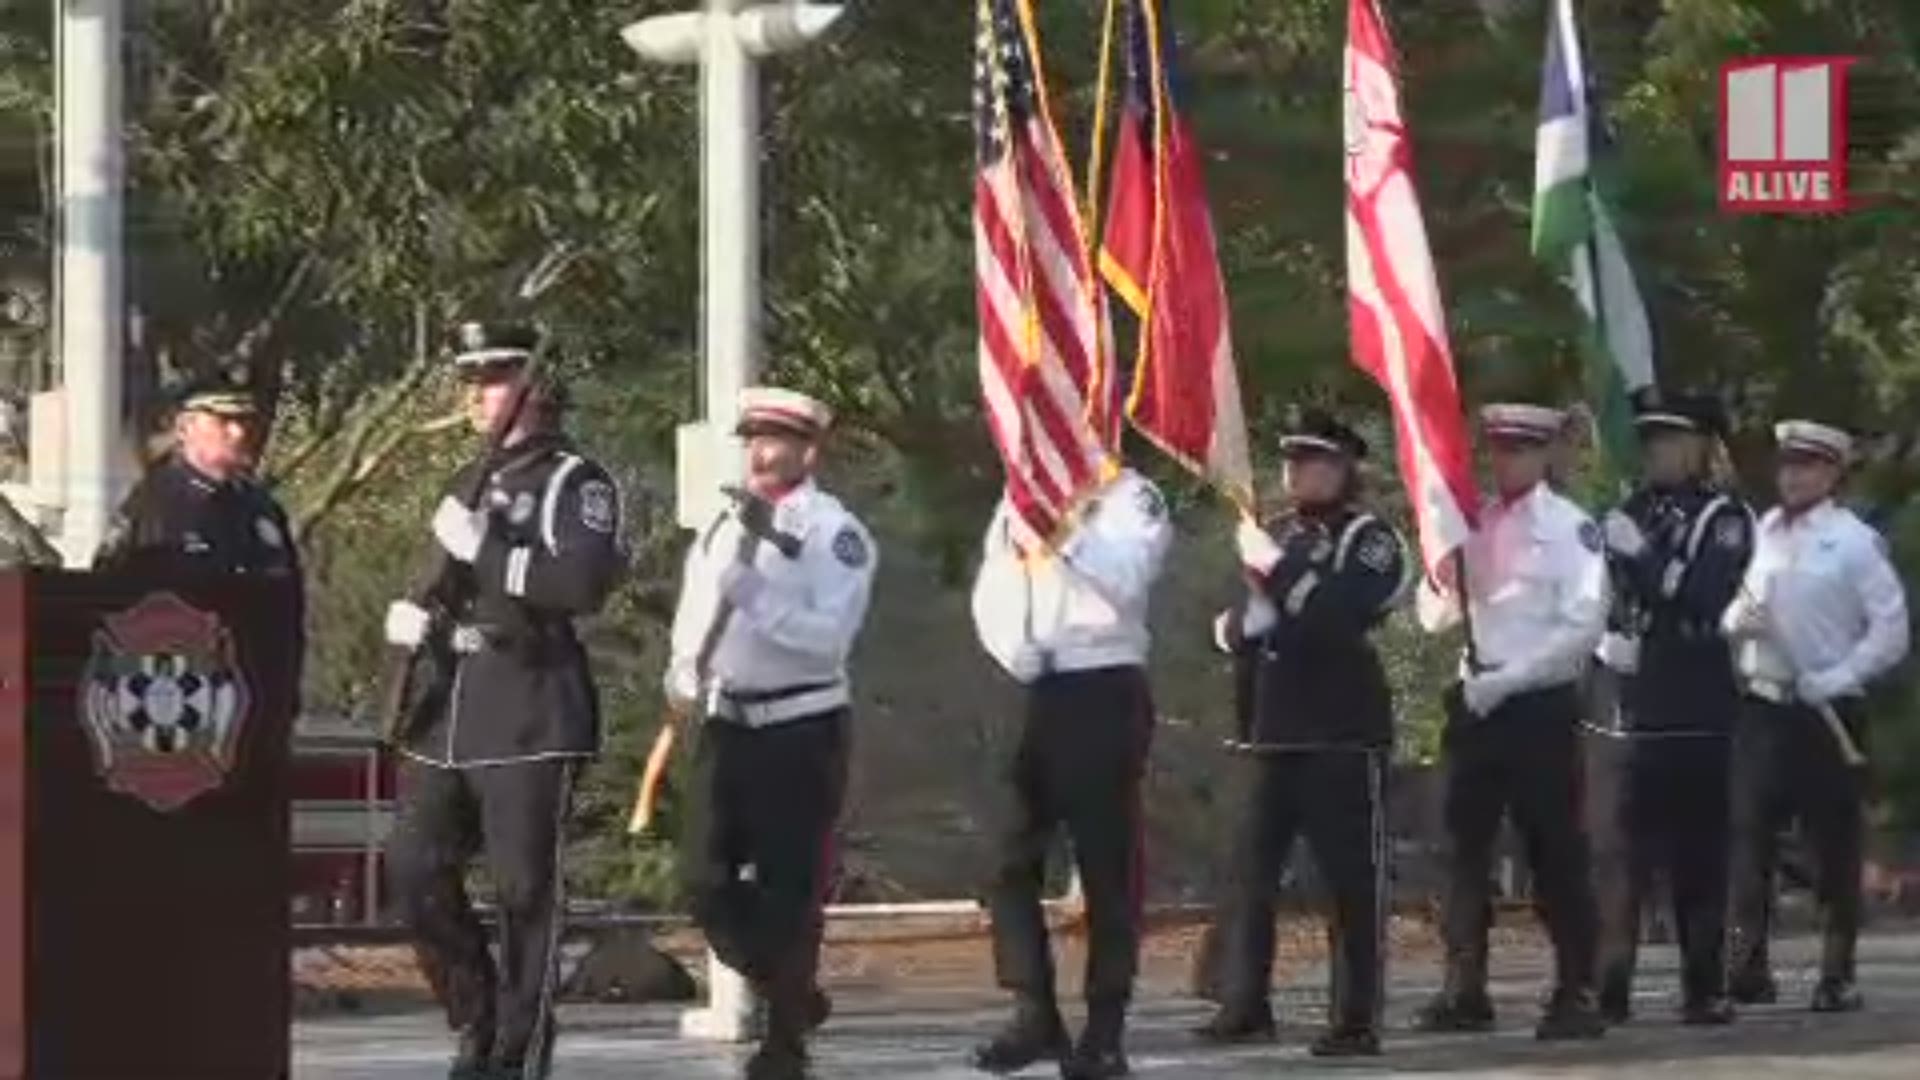 A remembrance ceremony was held in Smyrna on Wednesday.